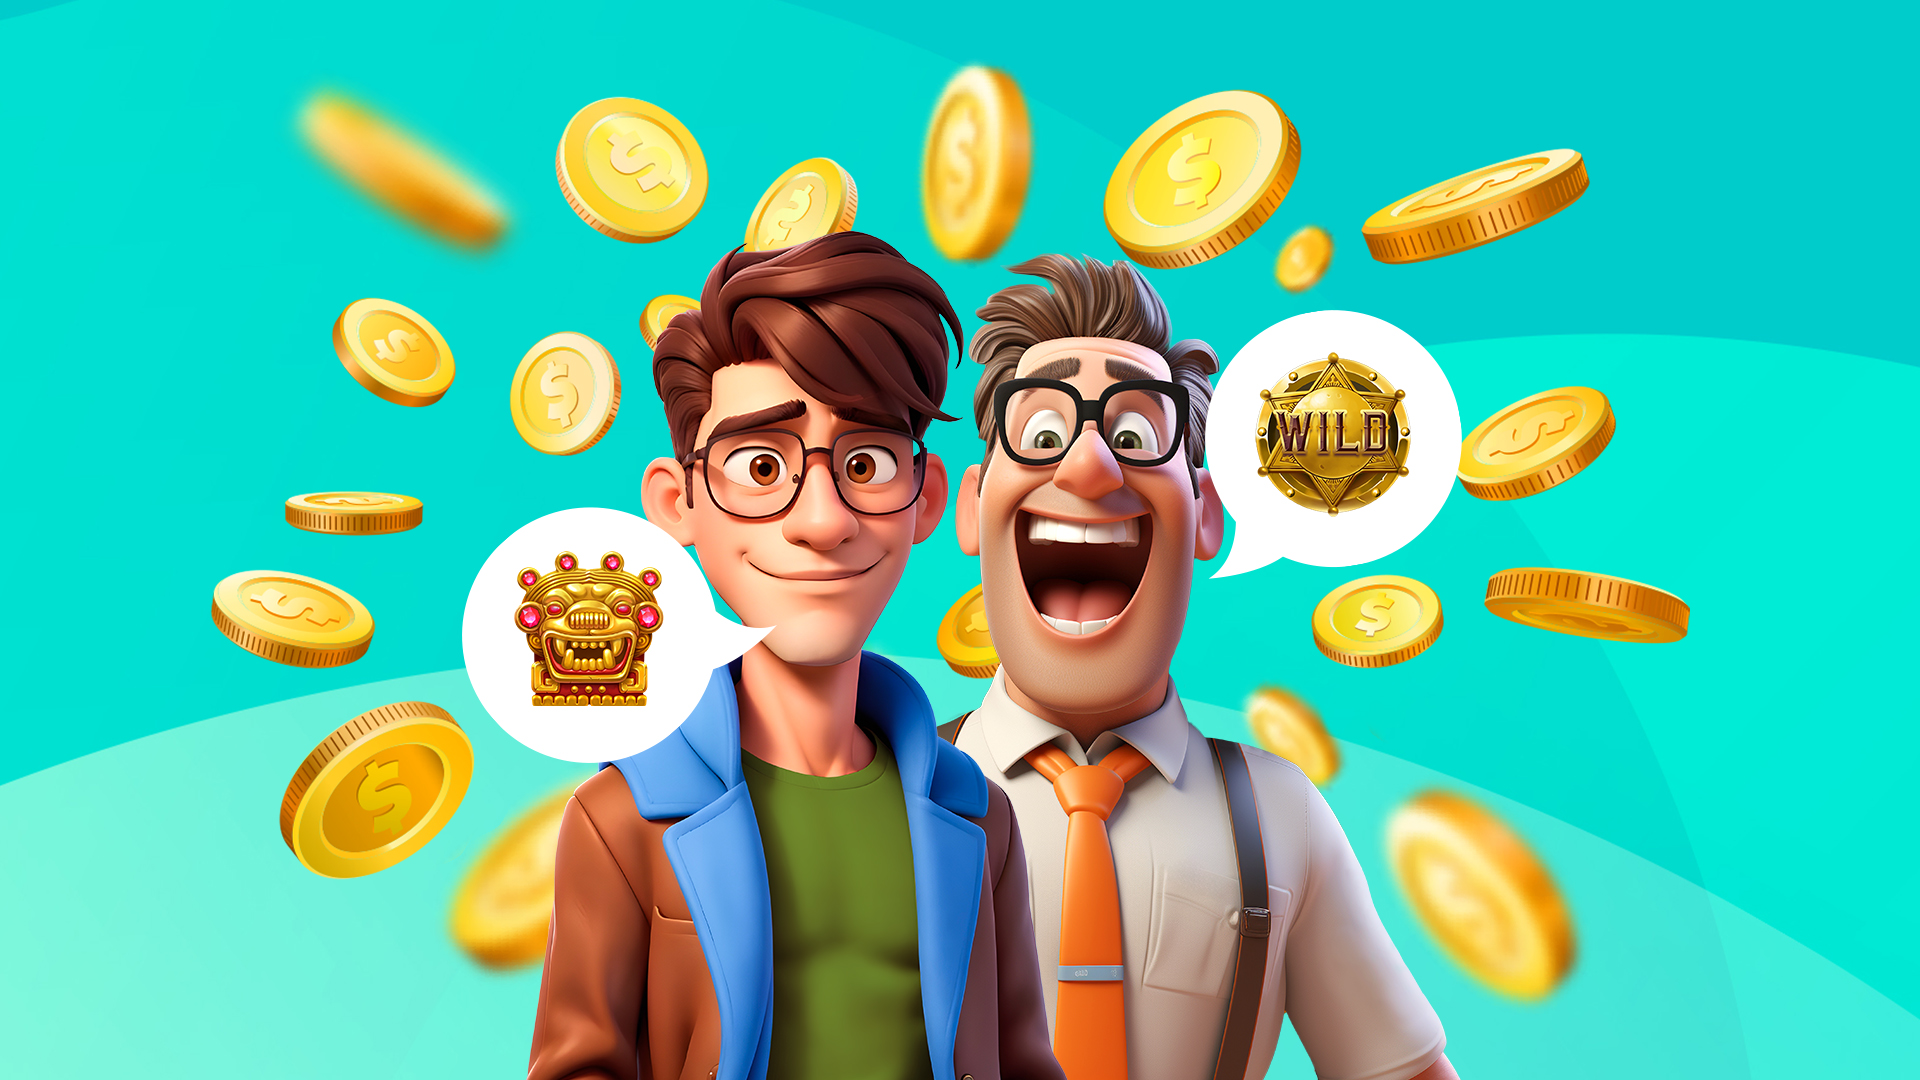 Two 3D cartoon males - one younger and one older - with gold coins around them.